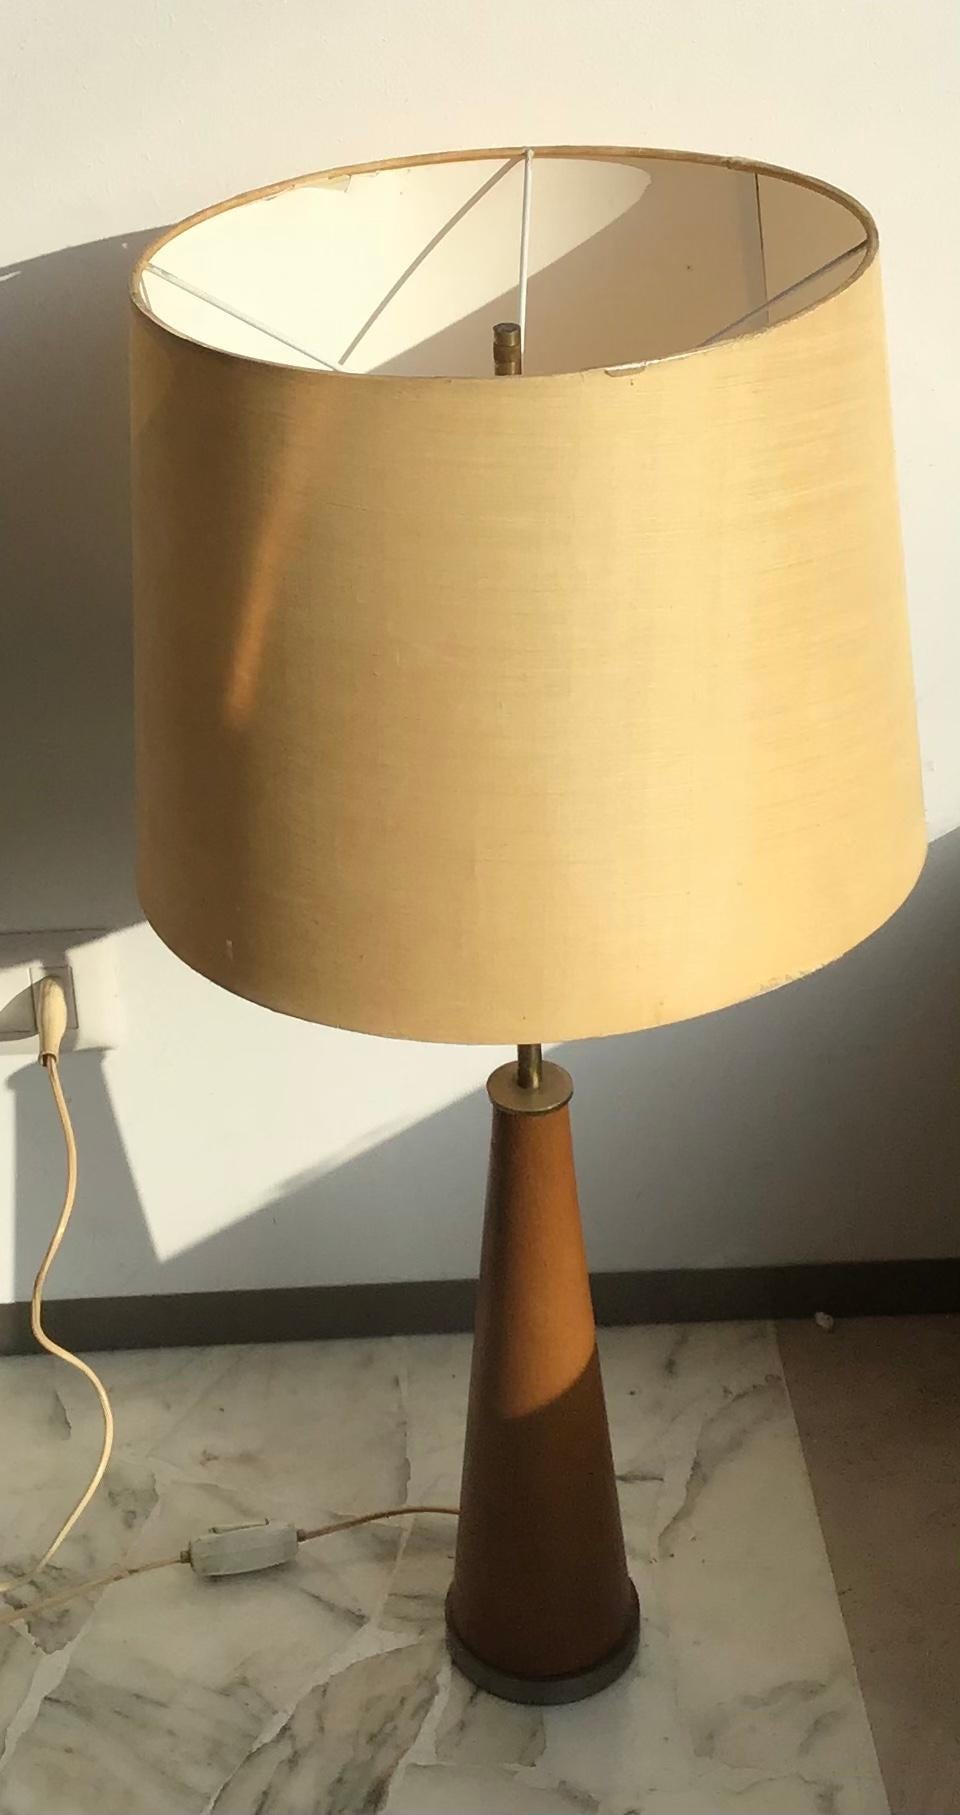 Stilnovo Style table lamp metal crome skin fabric lampshade, 1950, Italy.